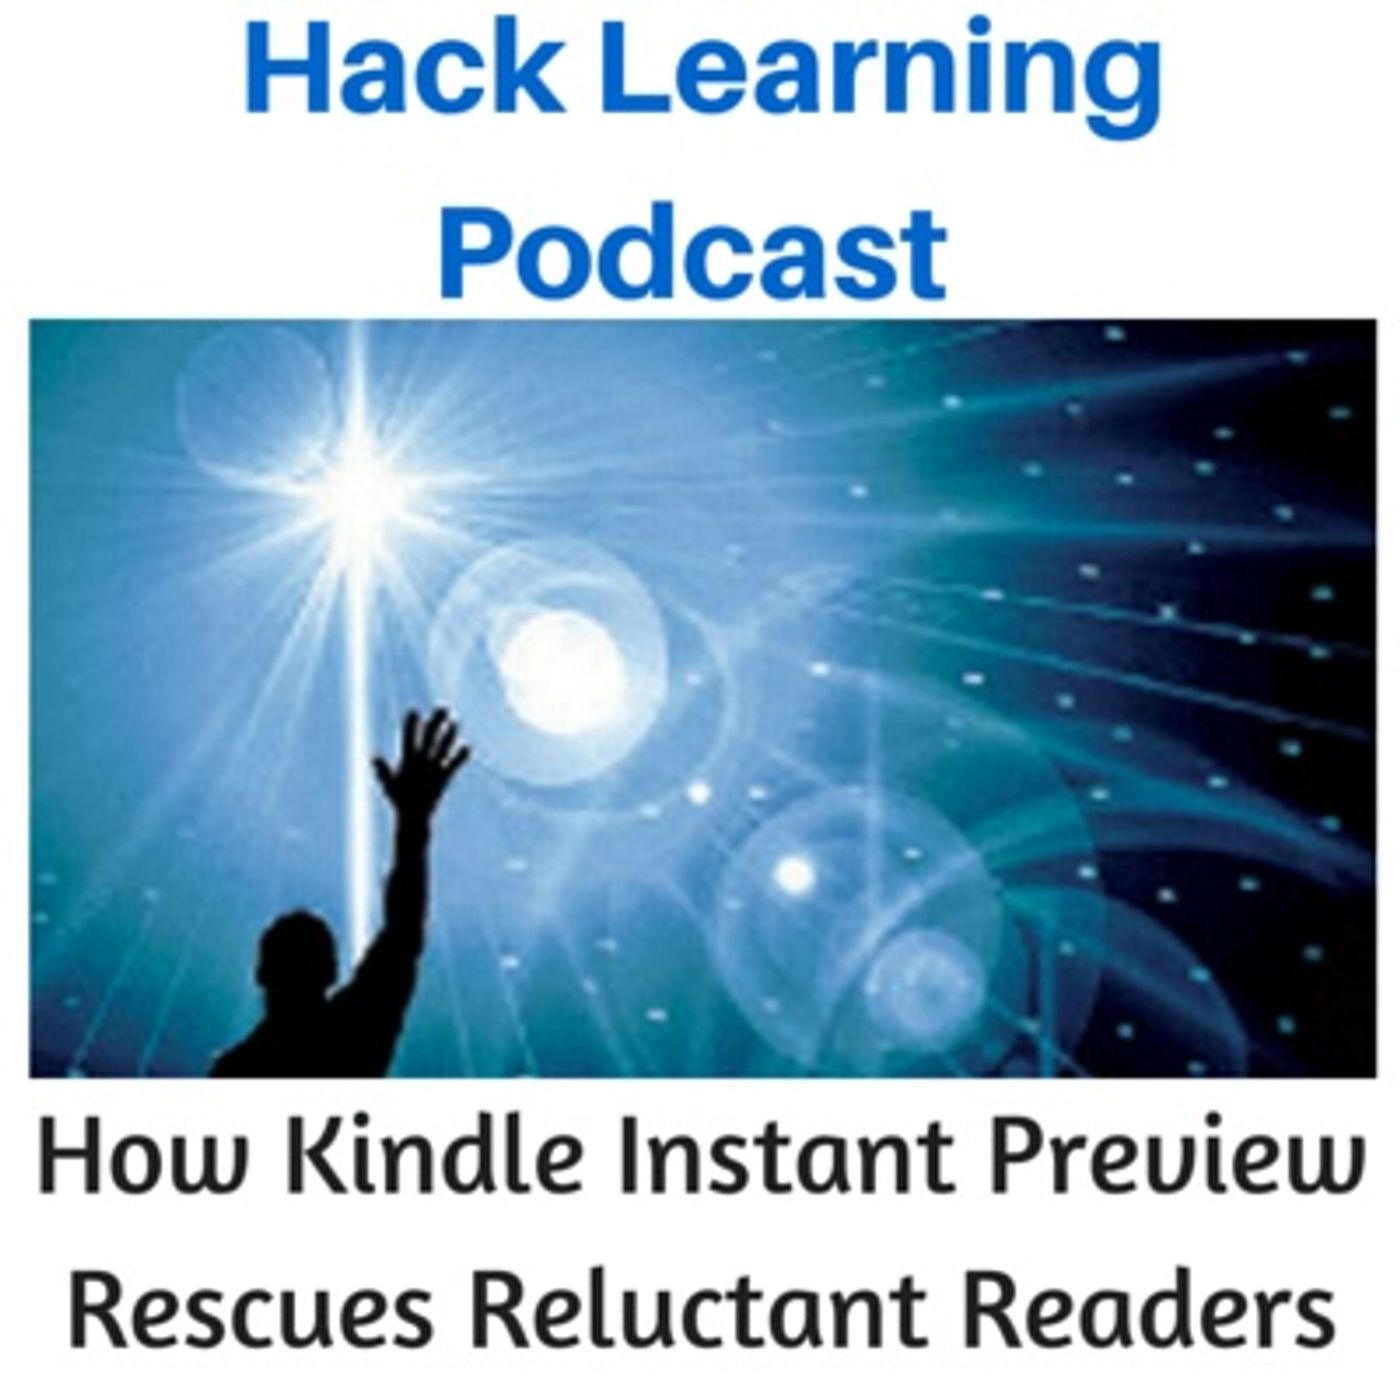 How Kindle Instant Preview Rescues Reluctant Readers